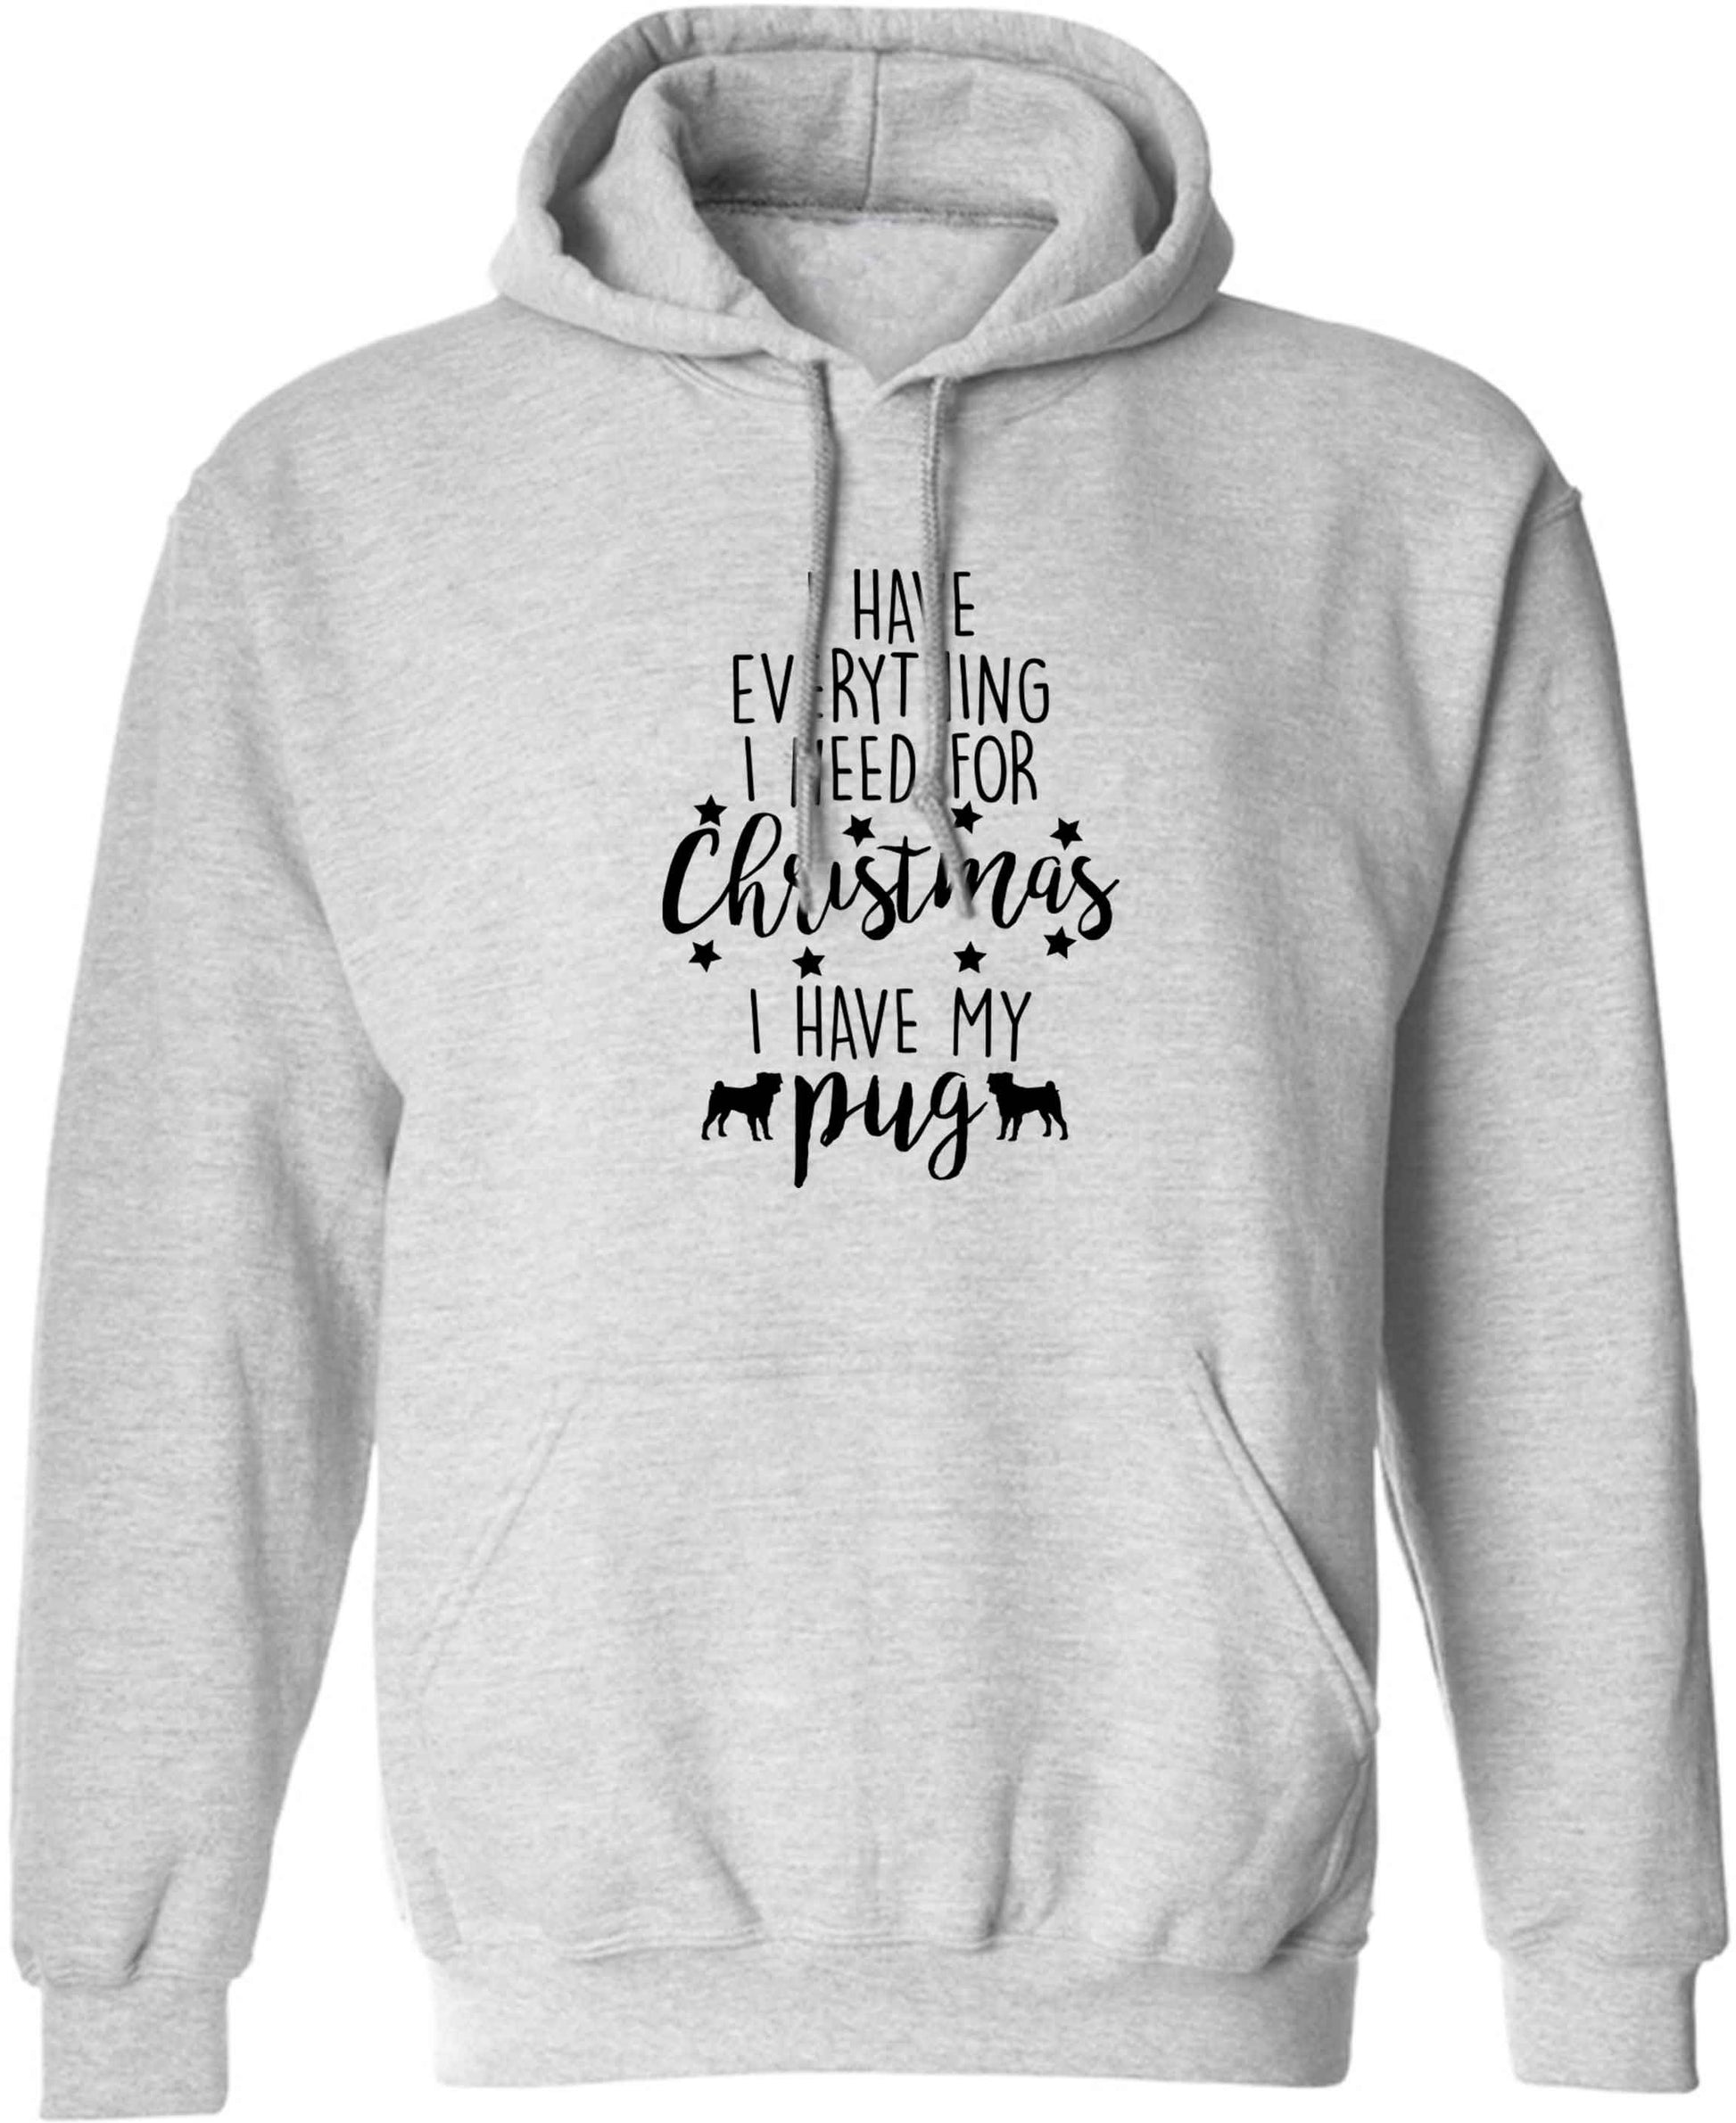 I have everything I need for Christmas I have my pug adults unisex grey hoodie 2XL